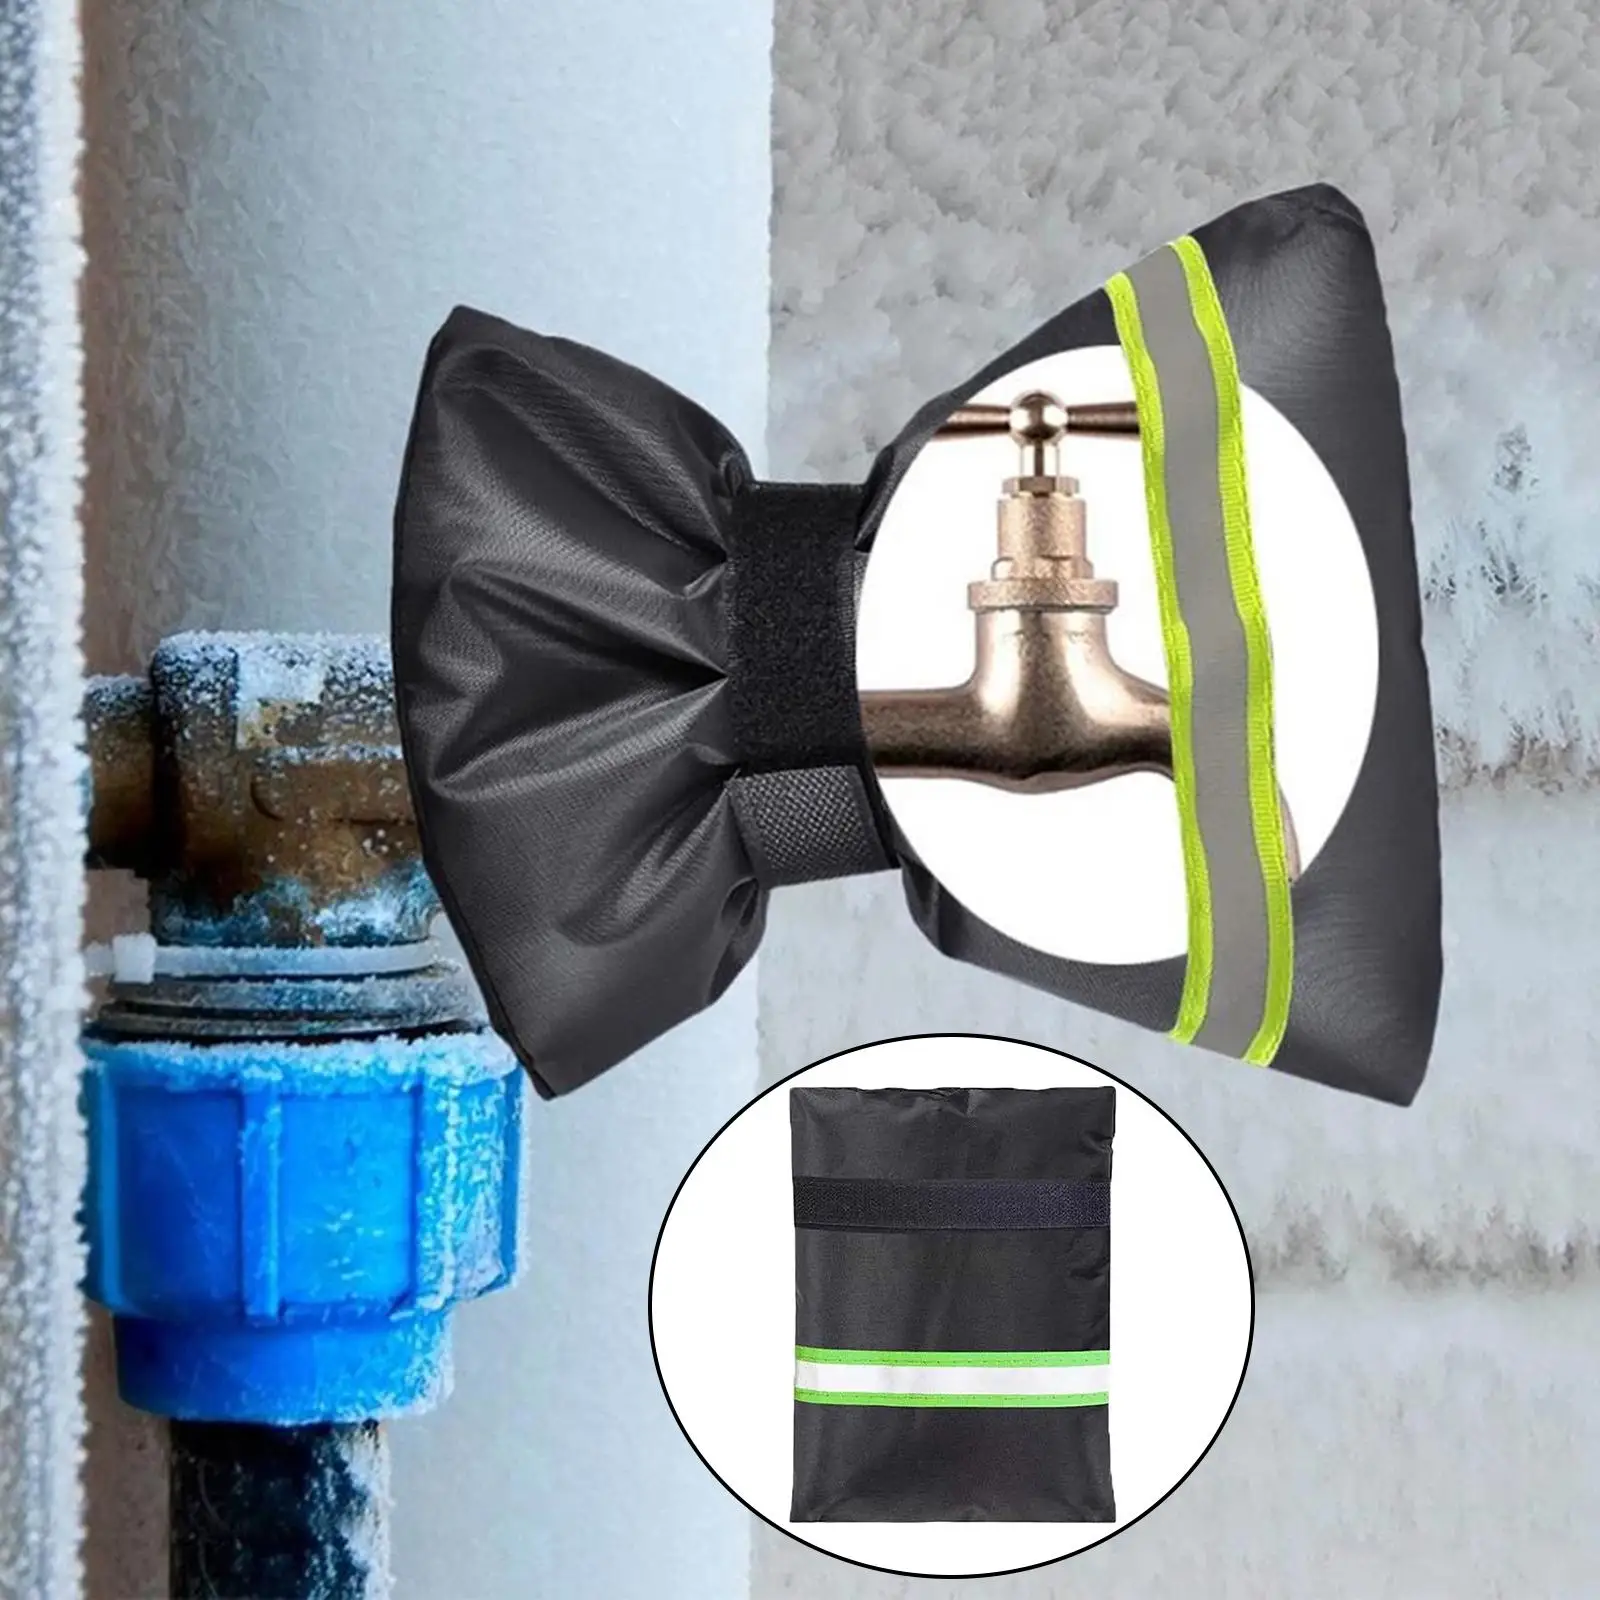 4x Outdoor Faucet Cover with Reflective Strips Waterproof Insulated